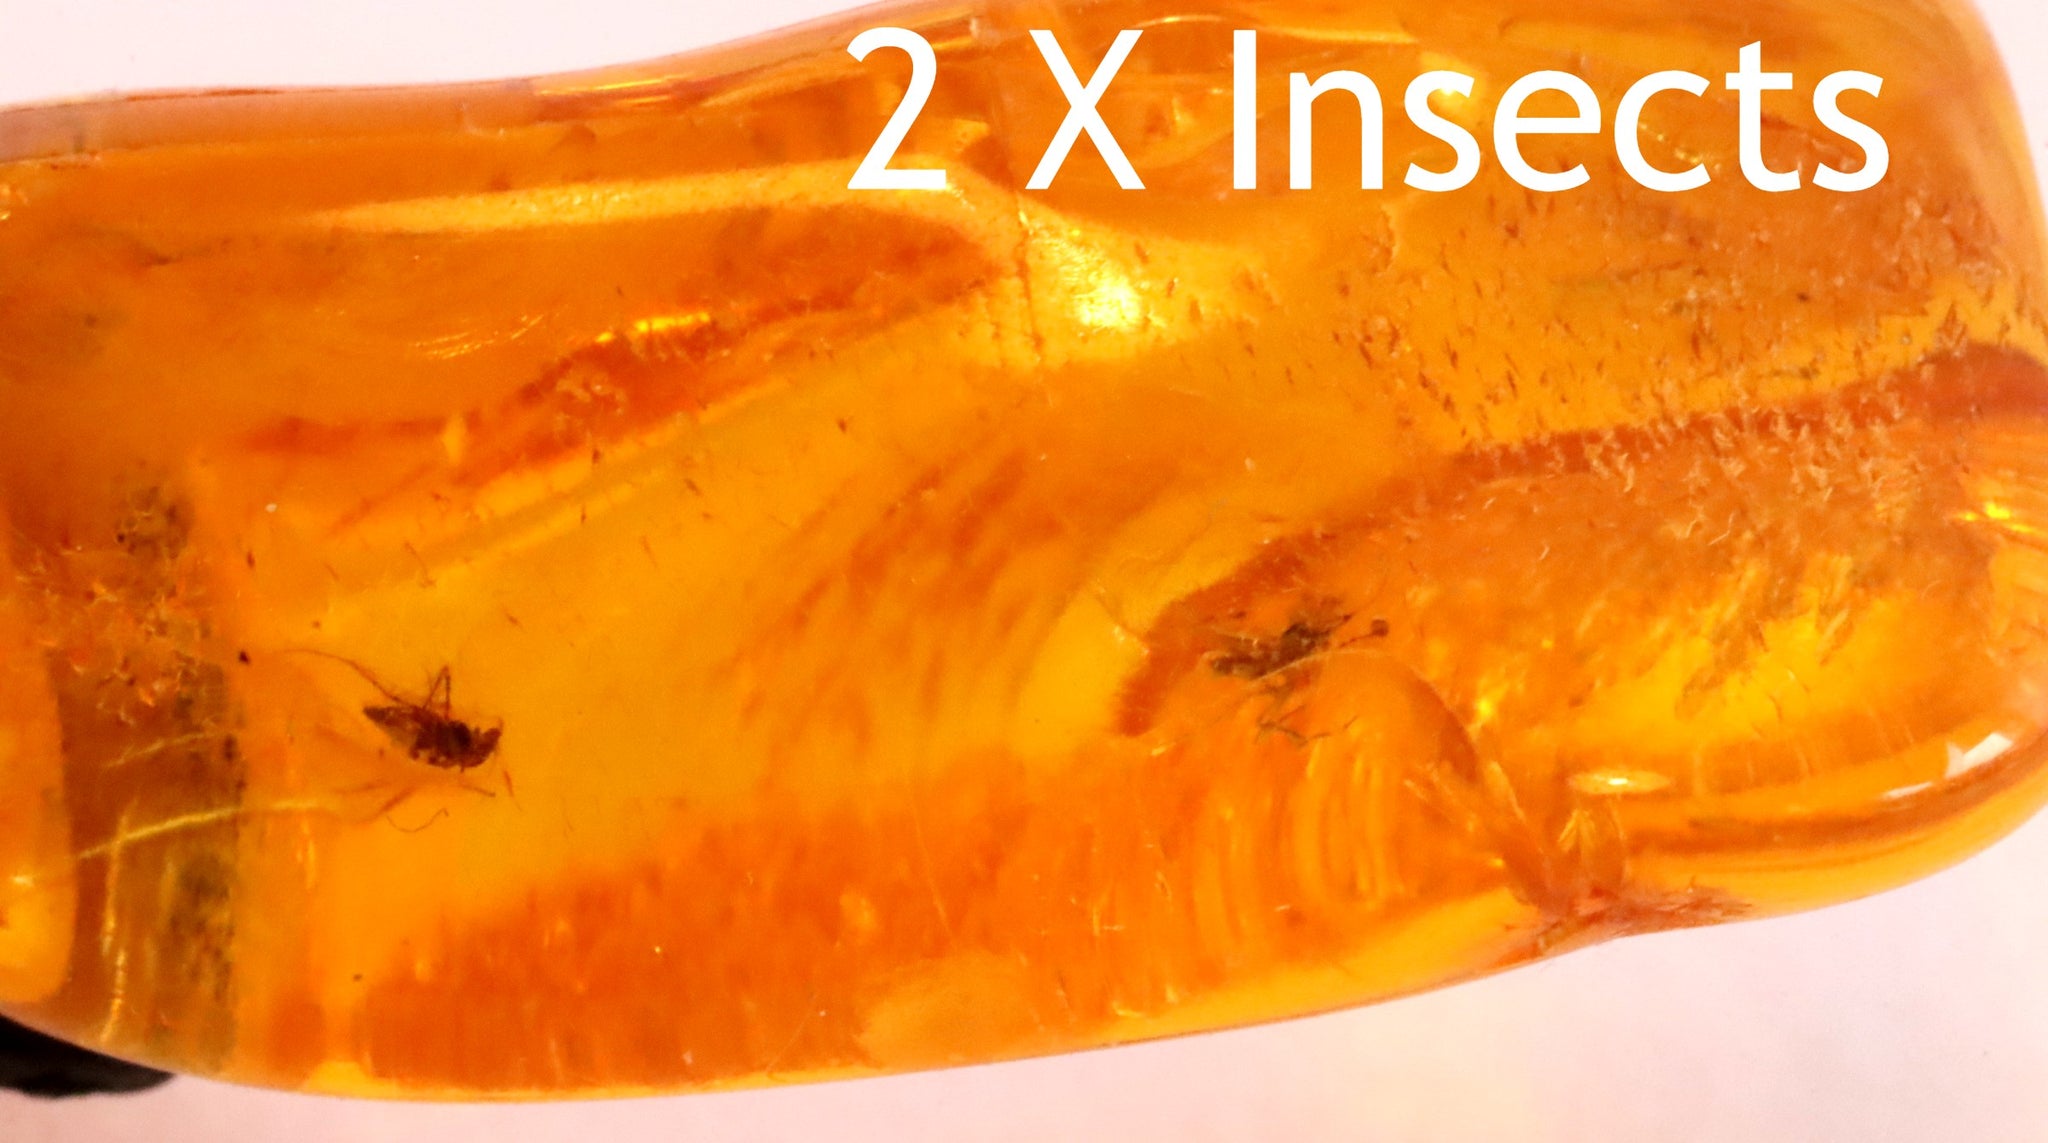 2 X 40 million year old Insects in this Inclusion Amulet